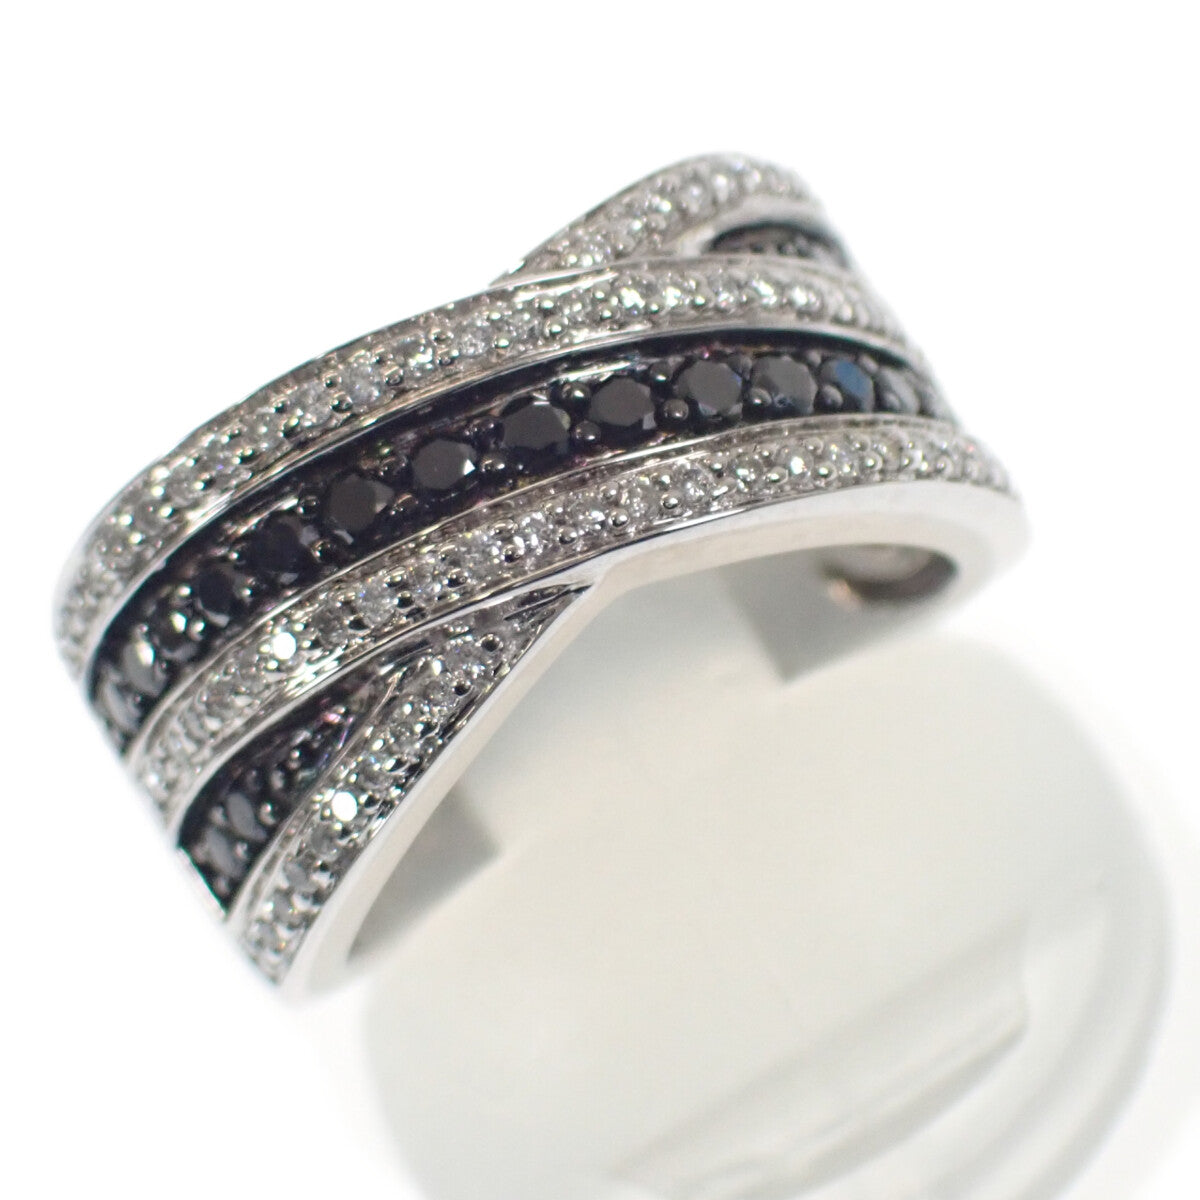 [LuxUness]  Women's Designer D0.70 Ring in K18 White Gold & Black Diamond, Size 12 (Used) in Excellent condition